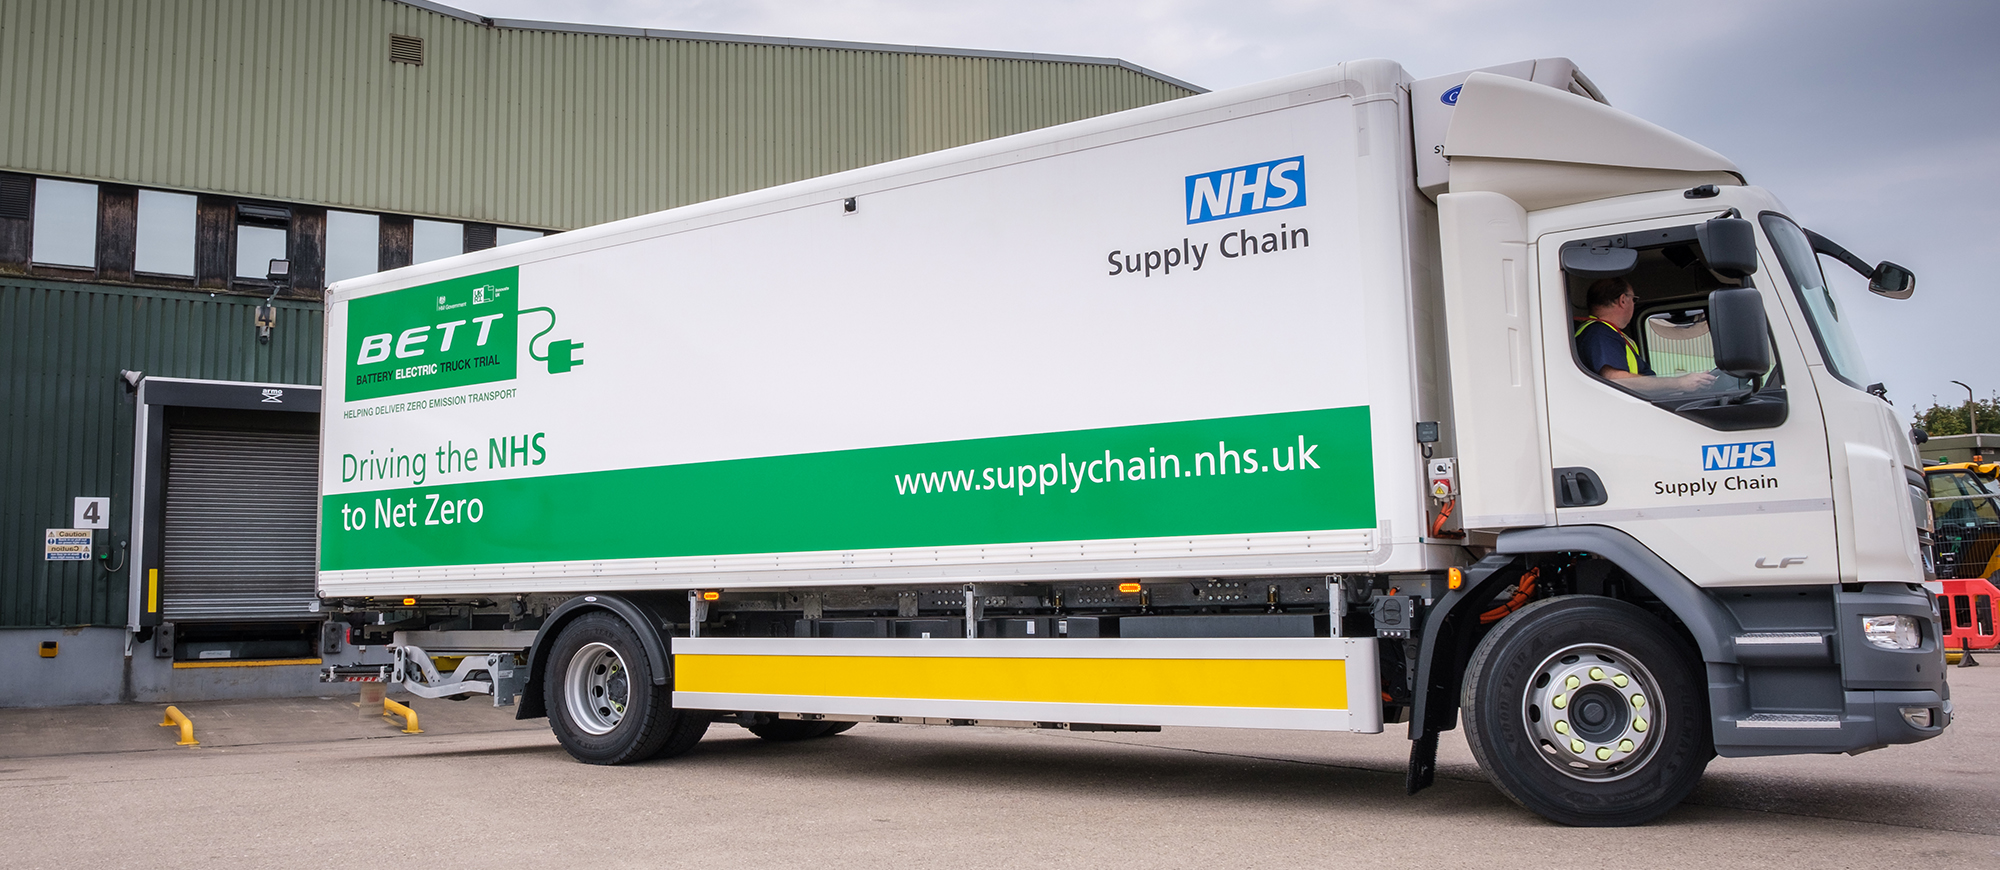 NHS Supply Chain eclectic truck - Driving to net zero